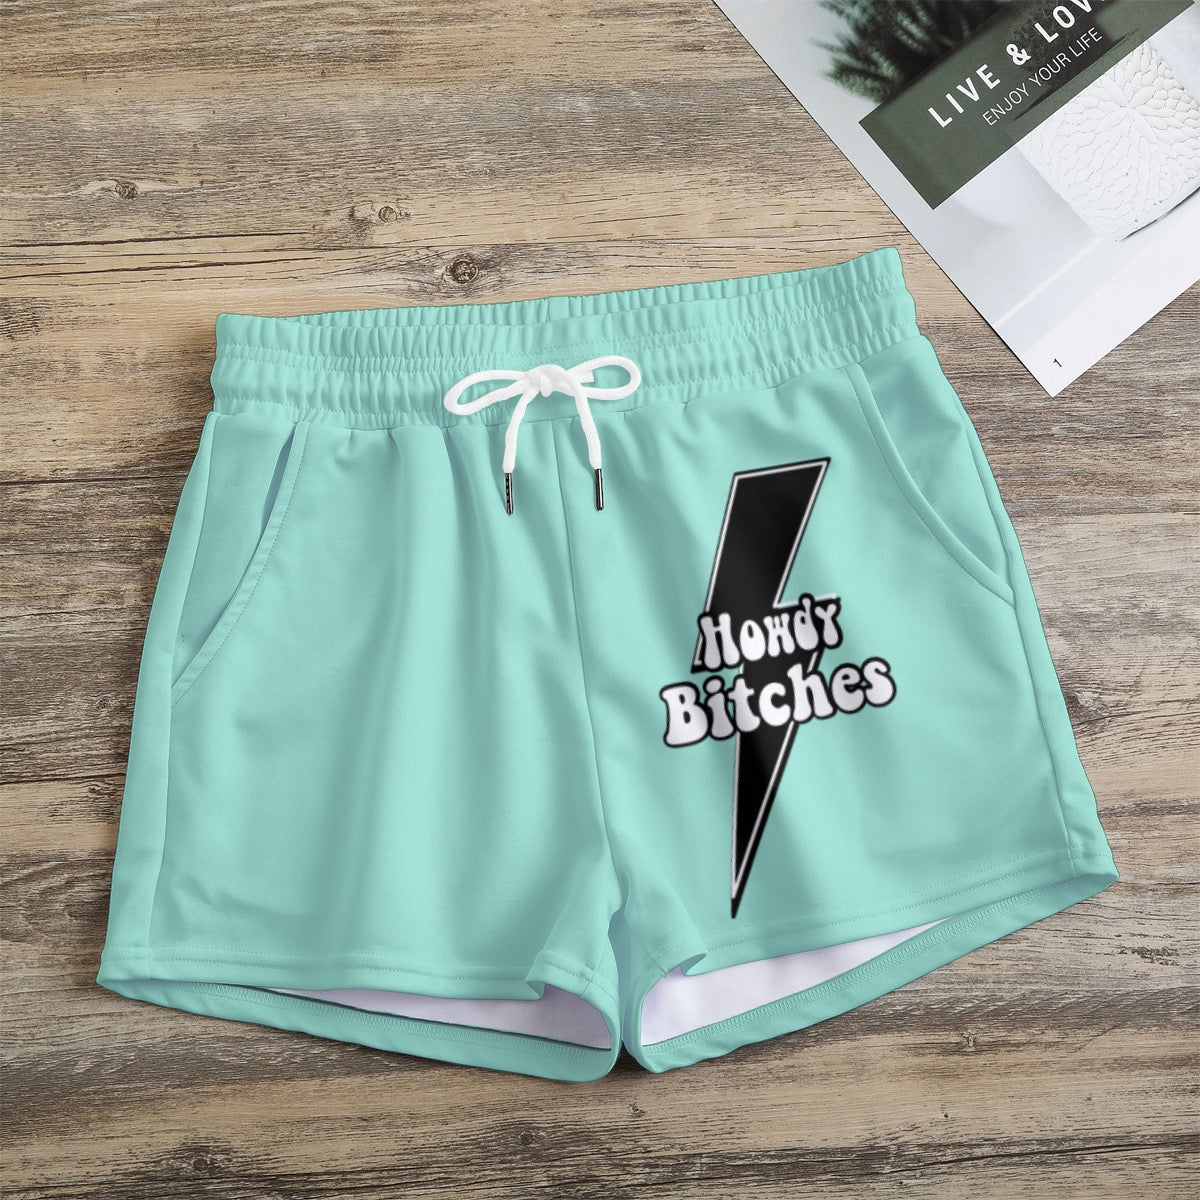 Howdy bitches turquoise Print Women's Casual Shorts